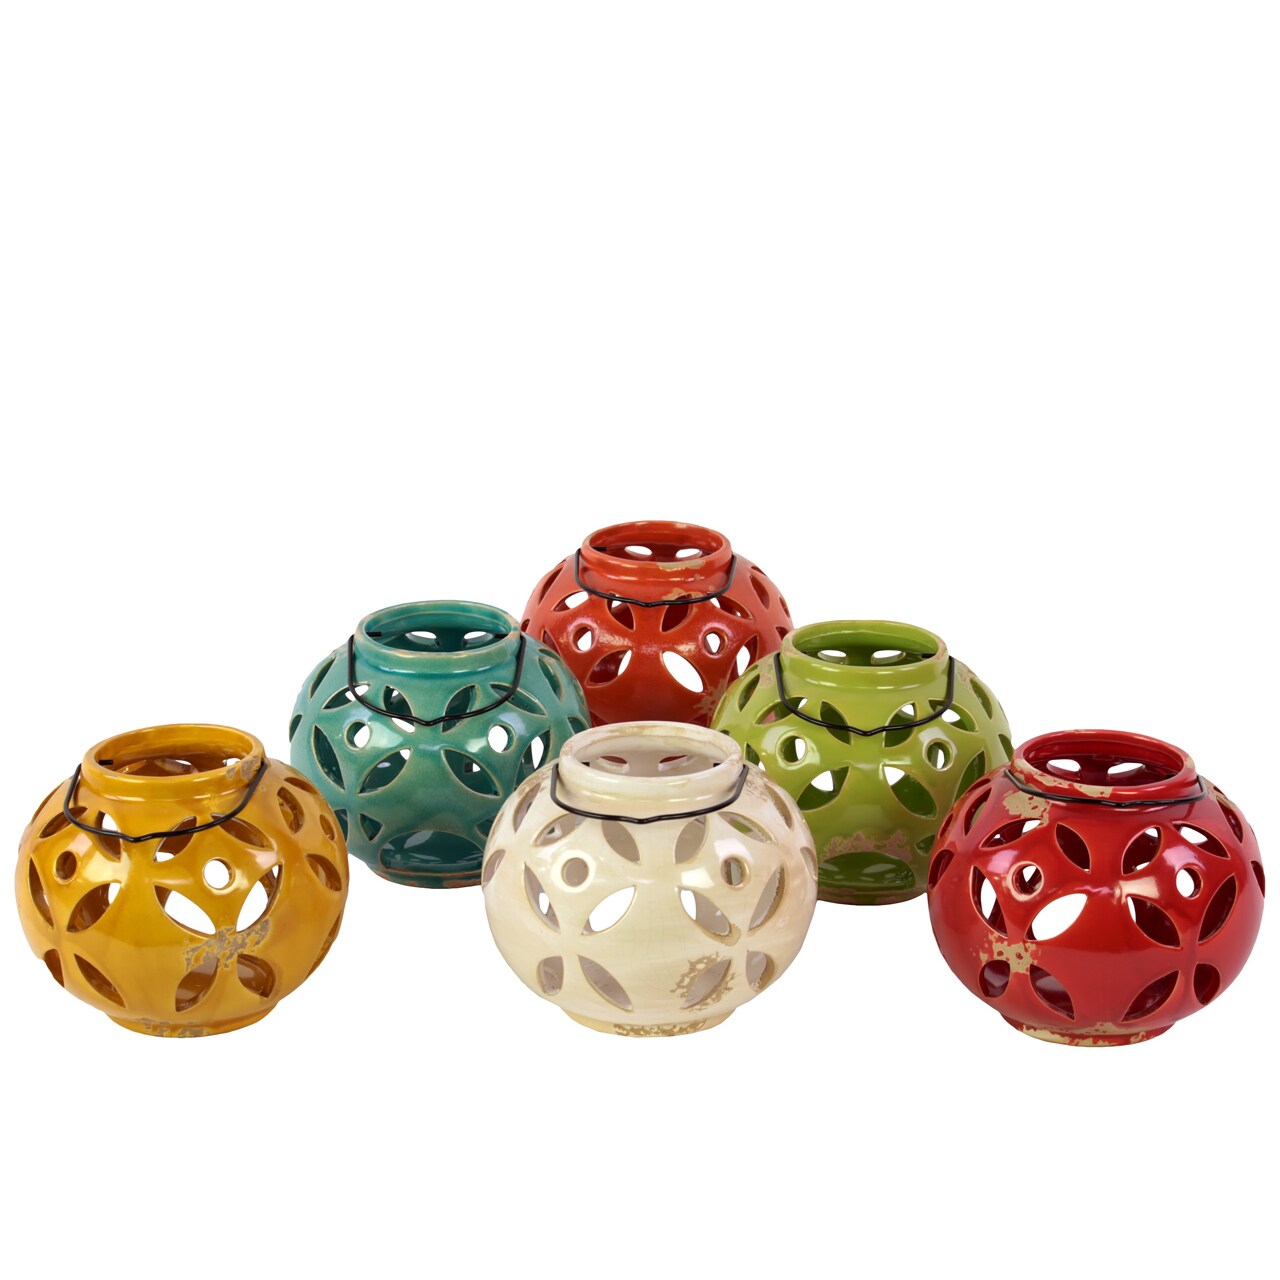 Ceramic Tea Light Lantern Assorted Set Of Six (Red/ turquoise/ green/ orange/ yellow whiteDimensions (each) 8 inches high x 5.5 inches in diameter For decorative purposes only )